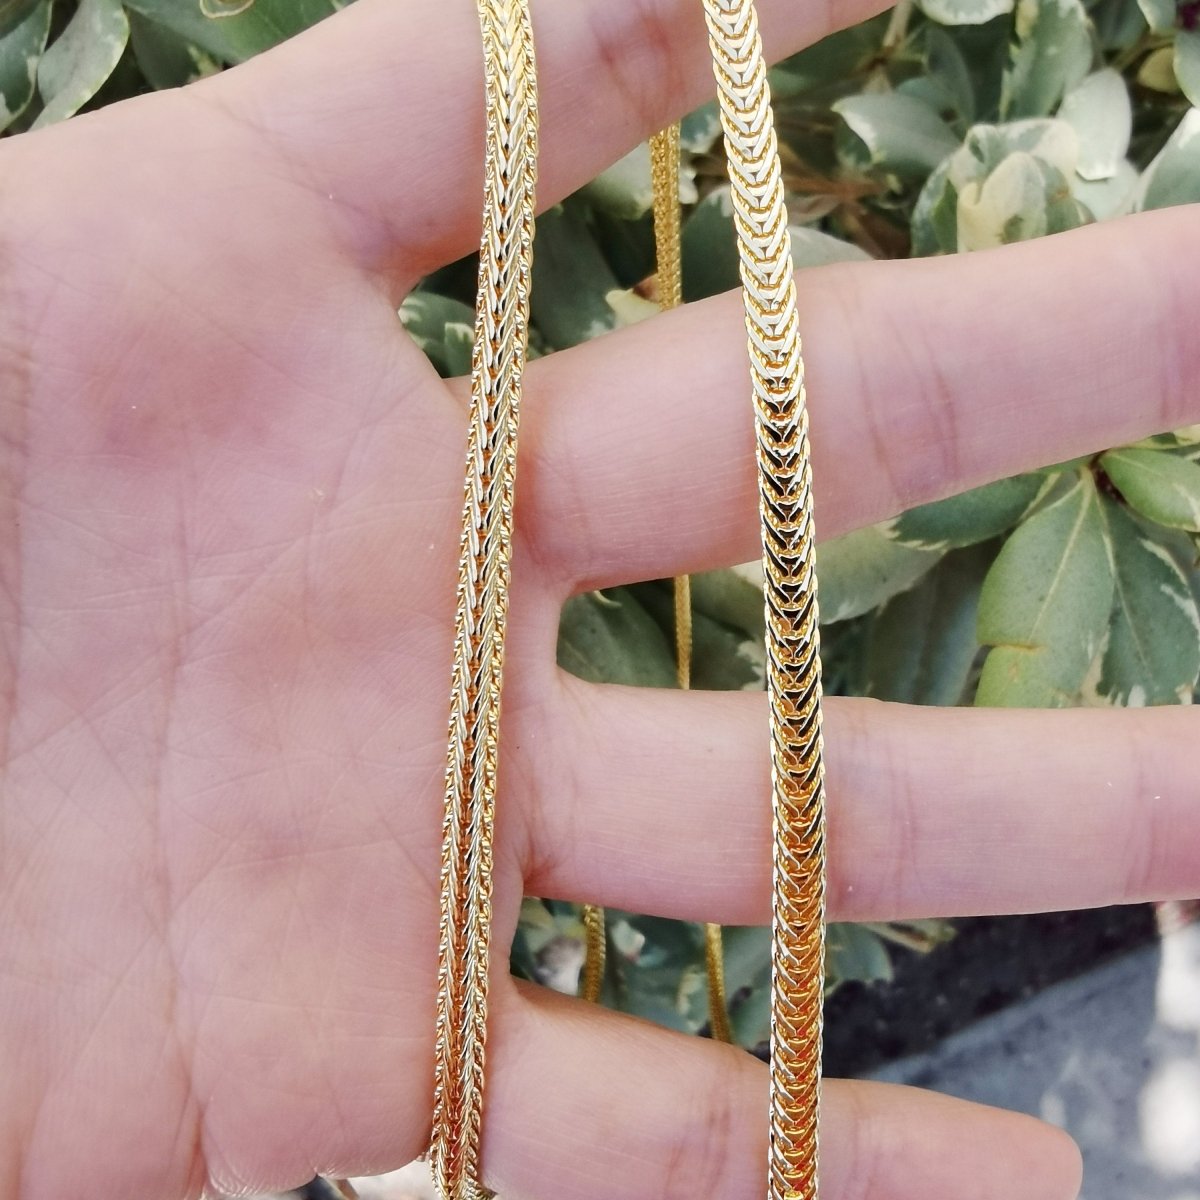 24K Gold Plated Herringbone Snake Star Weave Designed Necklace - 20 inches, 4mm Designed Necklace w/ Lobster Clasps | CN-753 Clearance Pricing - DLUXCA